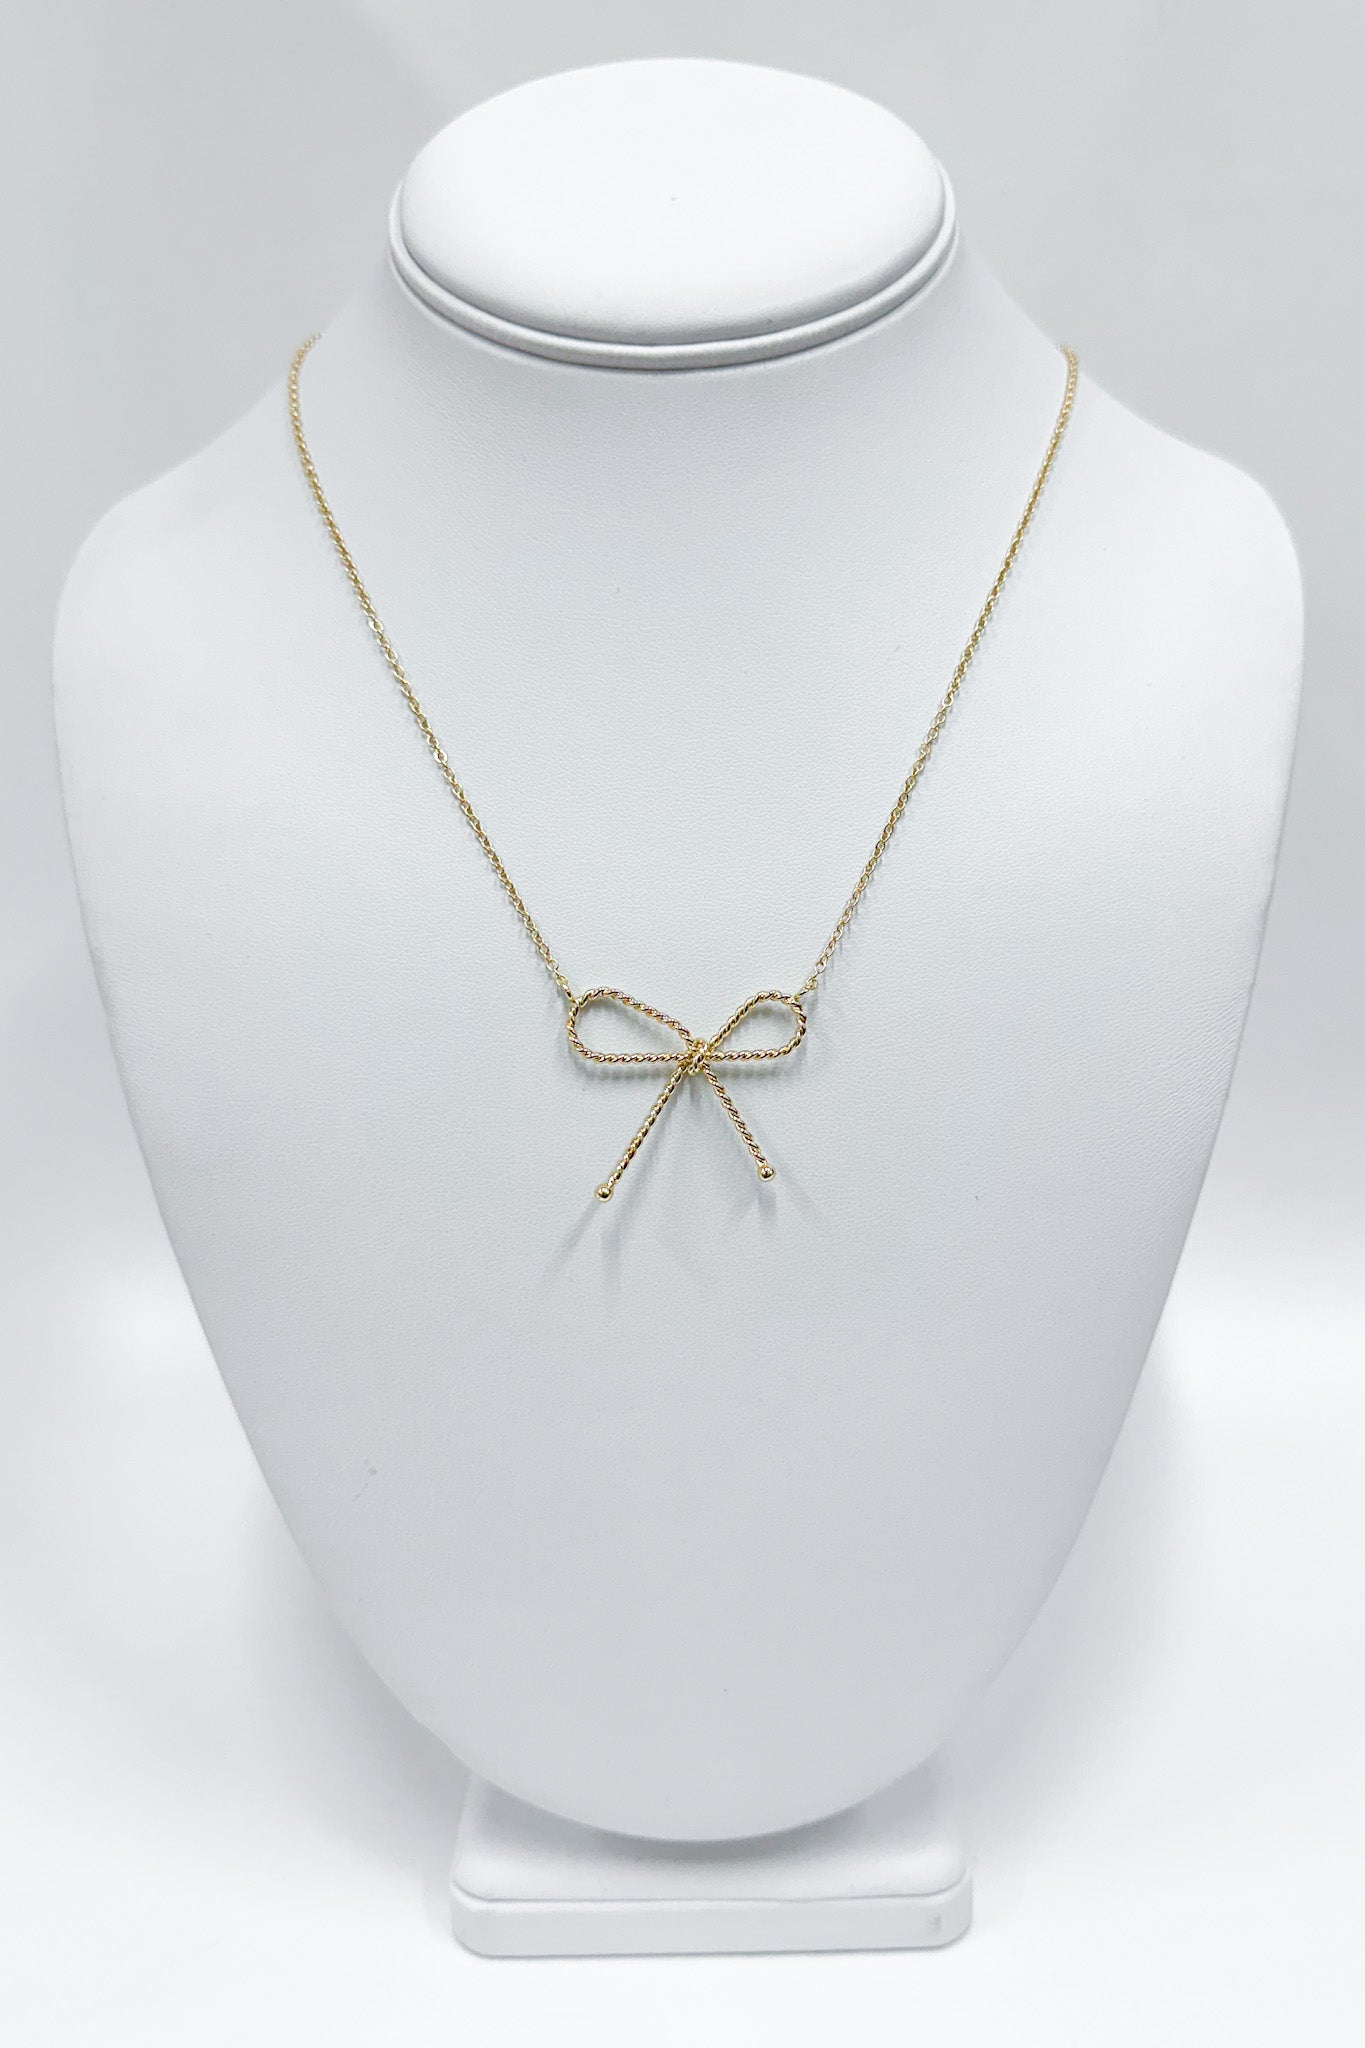  Perfectly Darling Bow Necklace - Madison and Mallory